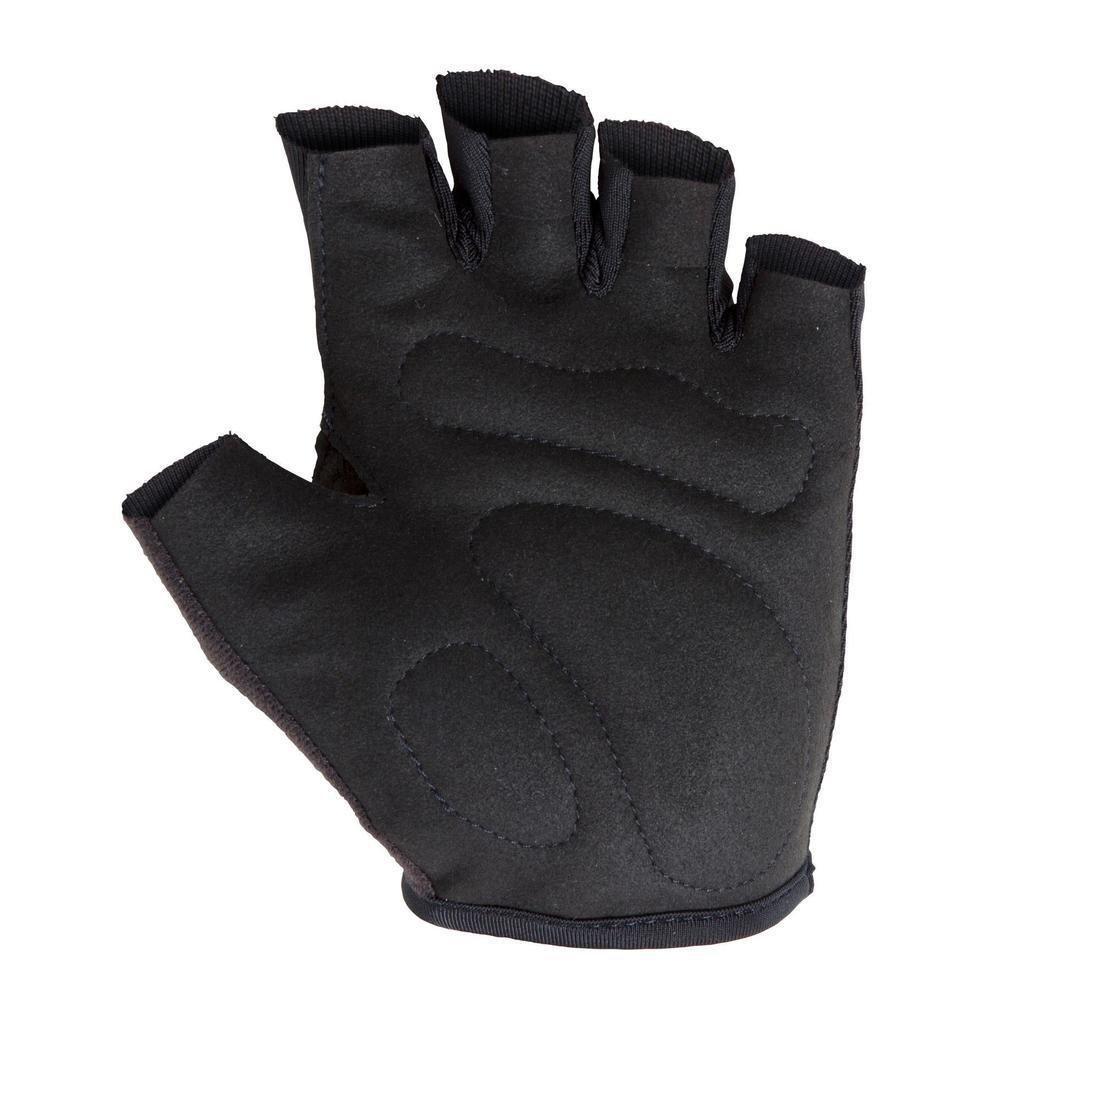 BTWIN - 100 Kid's Cycling Gloves, Black